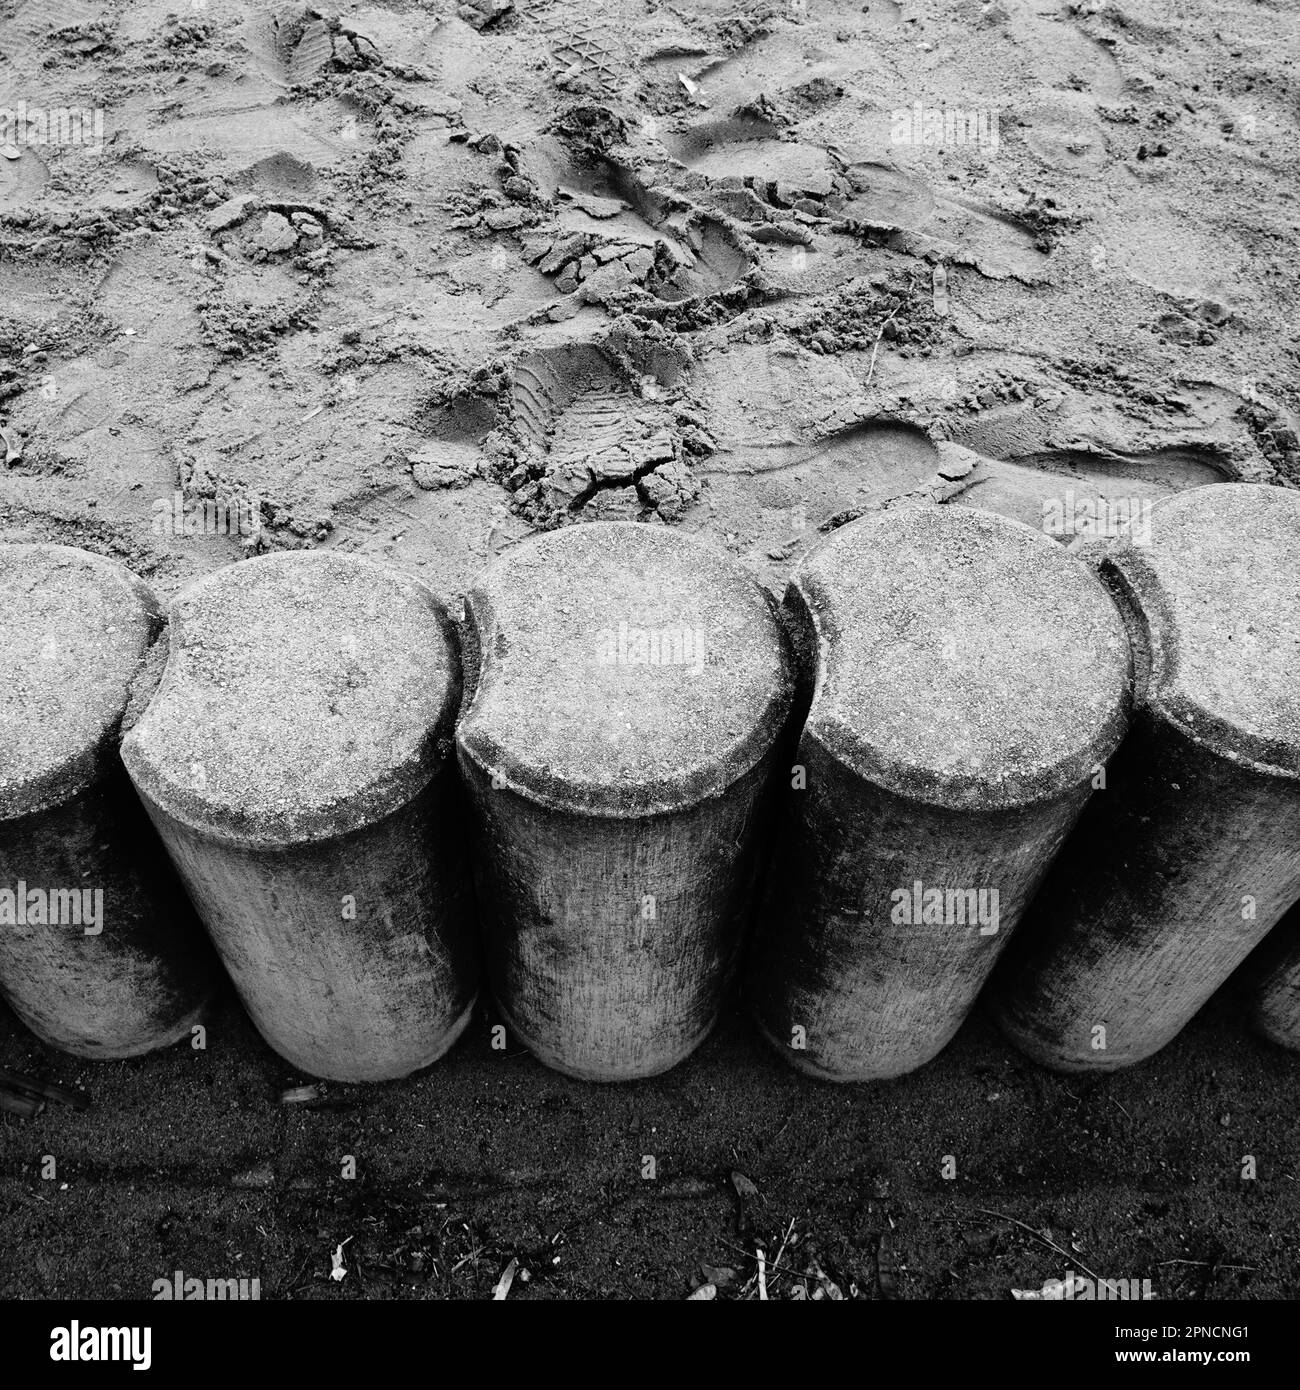 A high-resolution, black and white image of a wooden fence, composed of vertical posts Stock Photo